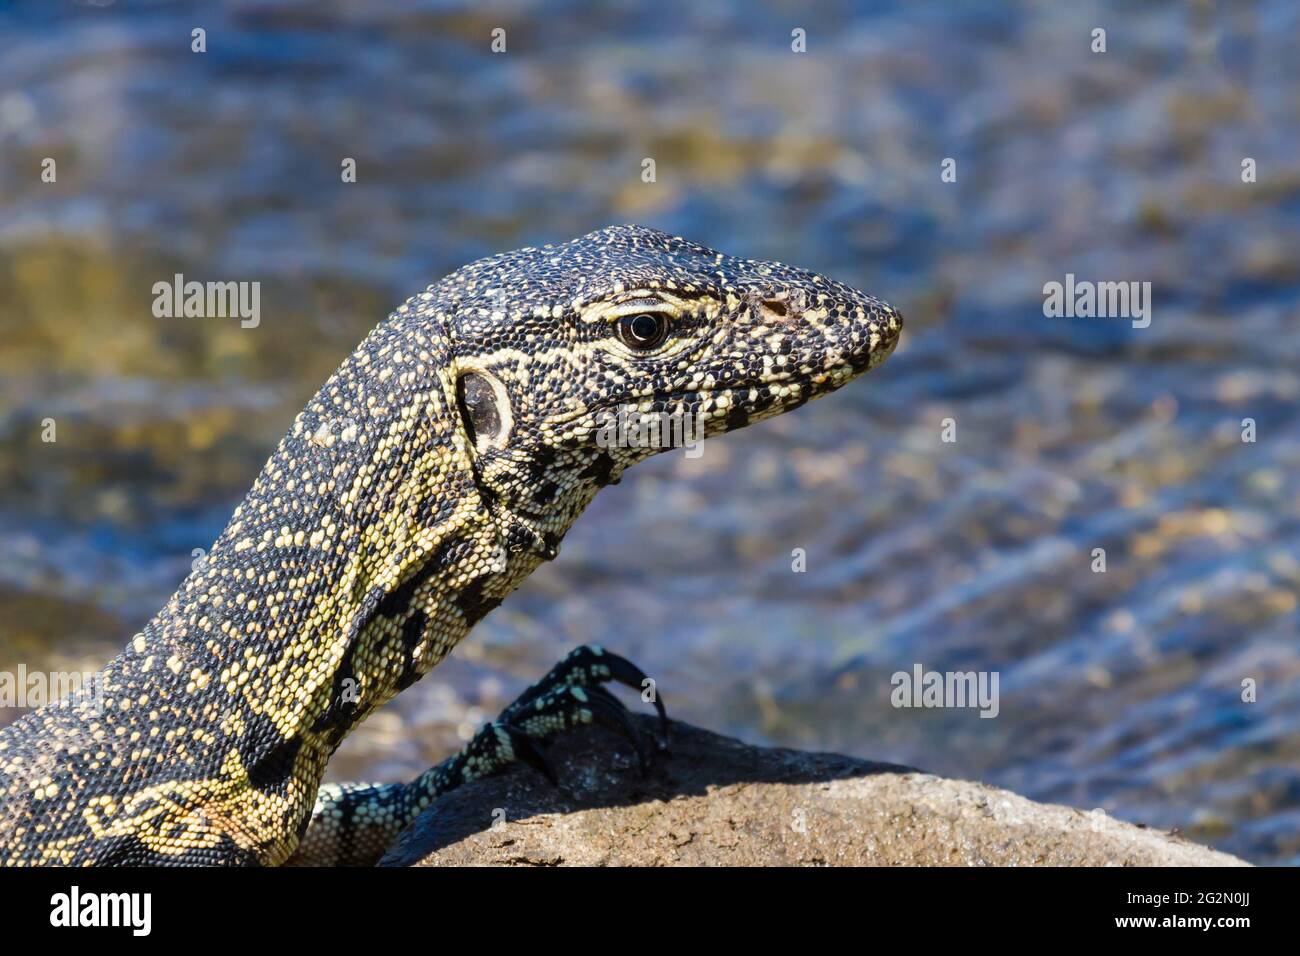 Nile water monitor lizard (Varanus niloticus) head closeup sitting on a rock in Kruger National Park, South Africa with blurred background Stock Photo